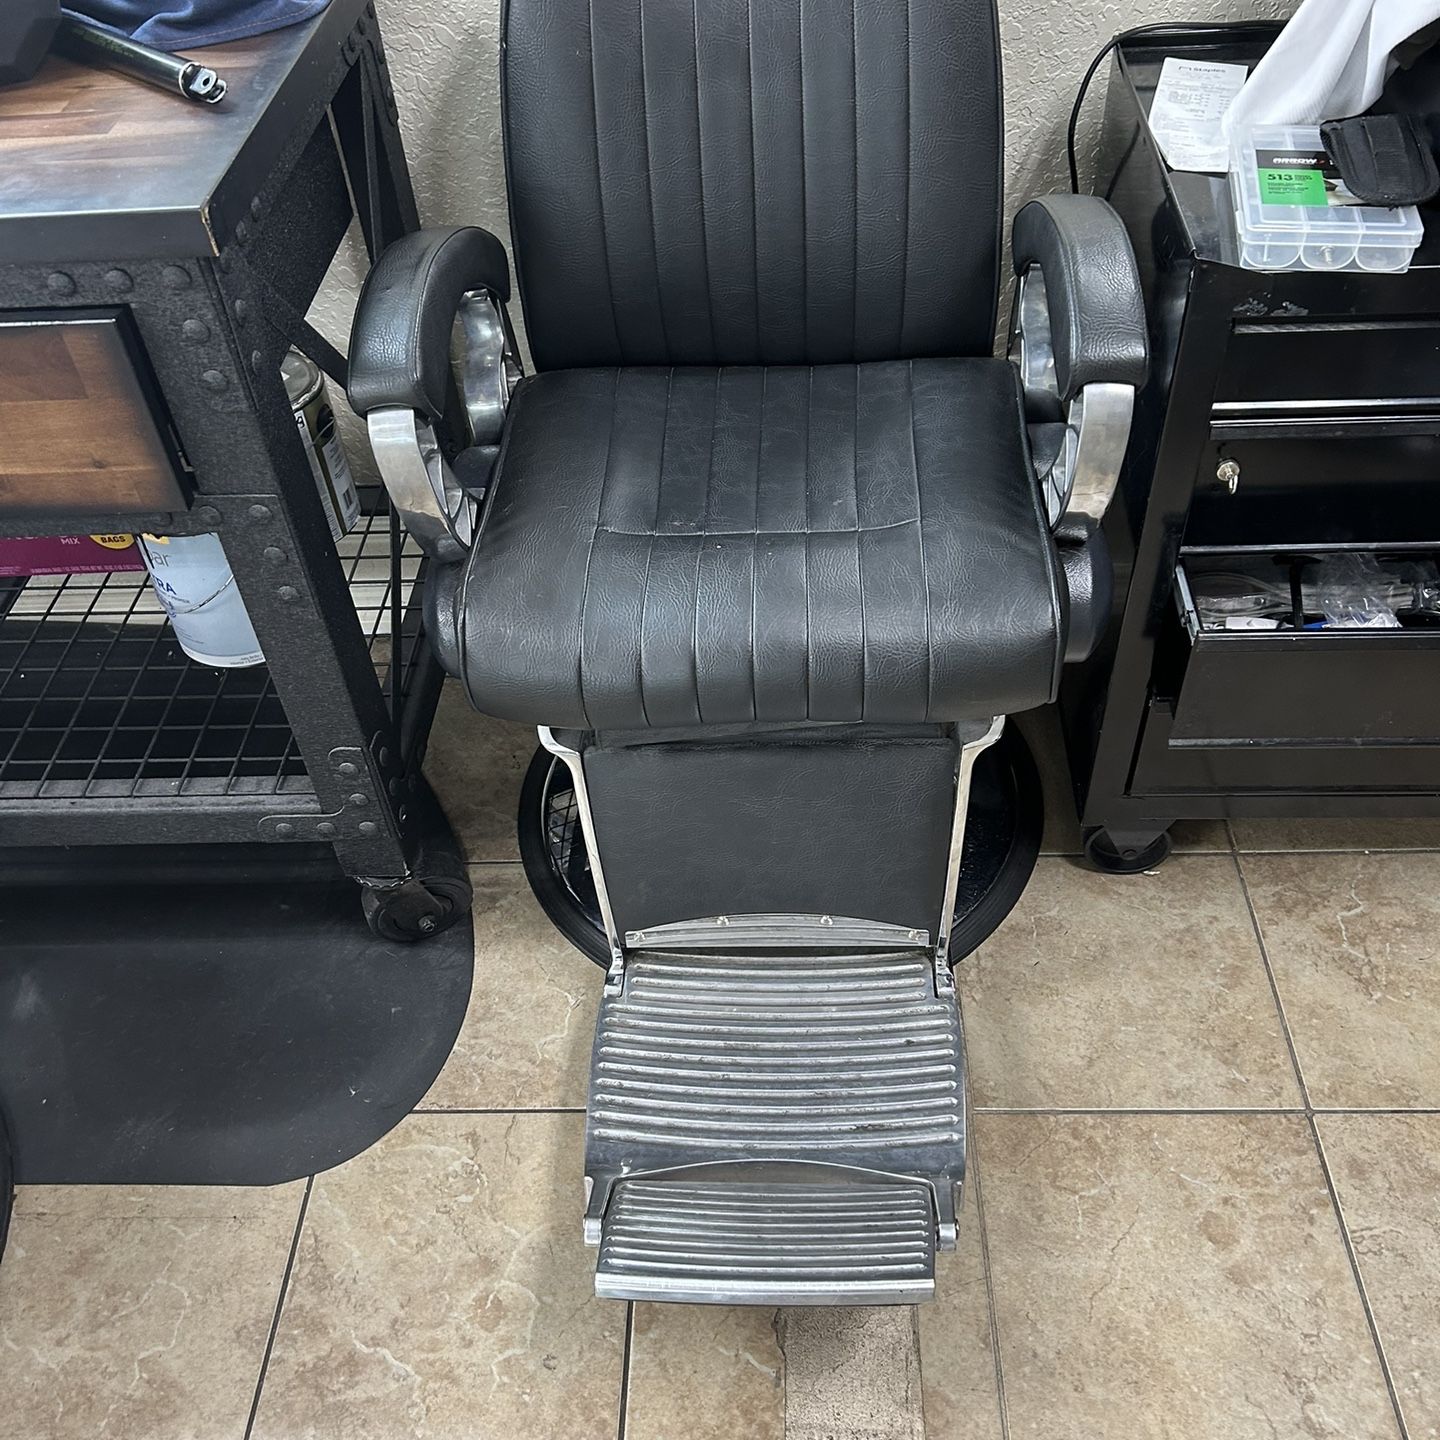 3 Barber Chairs Used But Good Condition